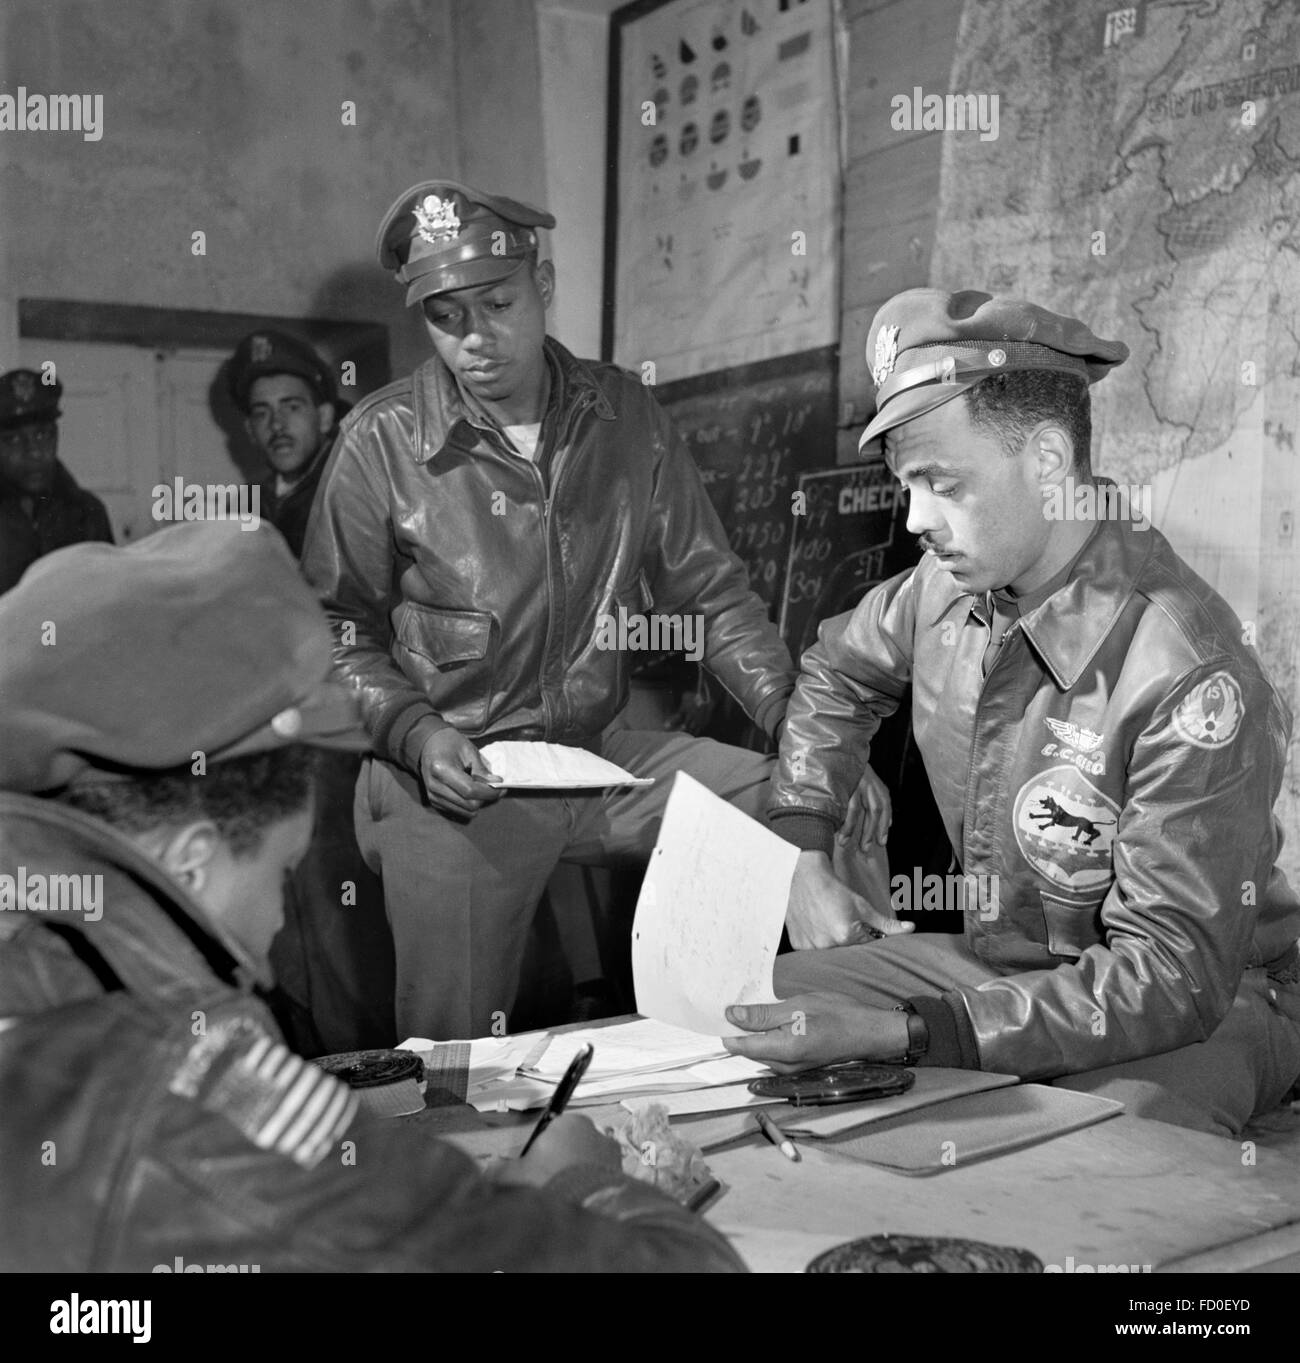 Tuskegee airmen from the 332nd Fighter Group in Ramitelli, Italy in March 1945. Stock Photo